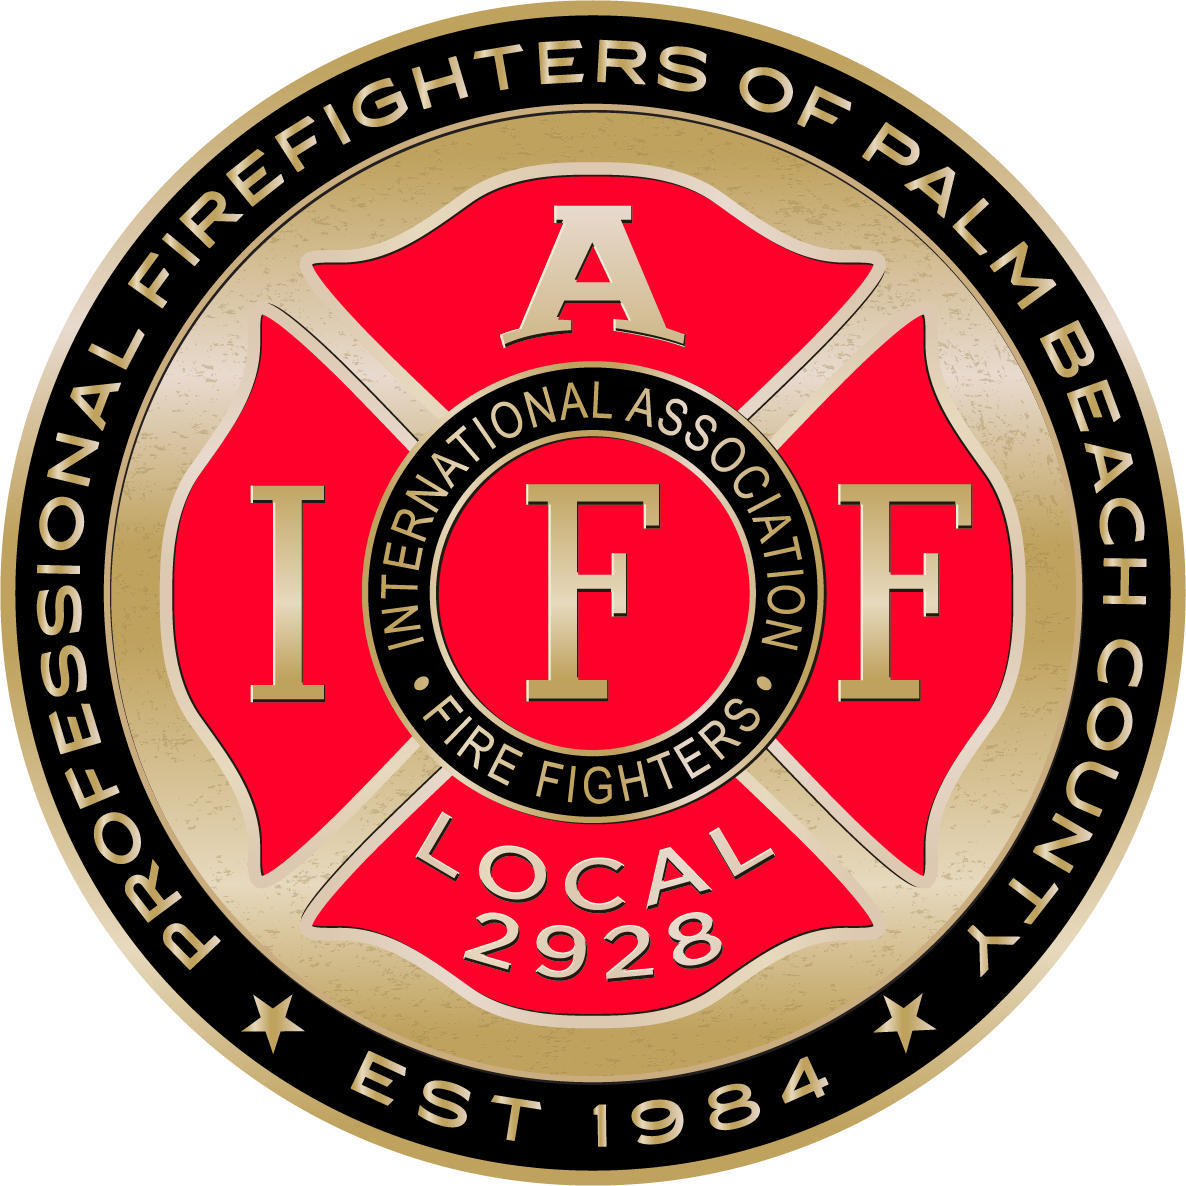 Professional Firefighters/Paramedics of Palm Beach County